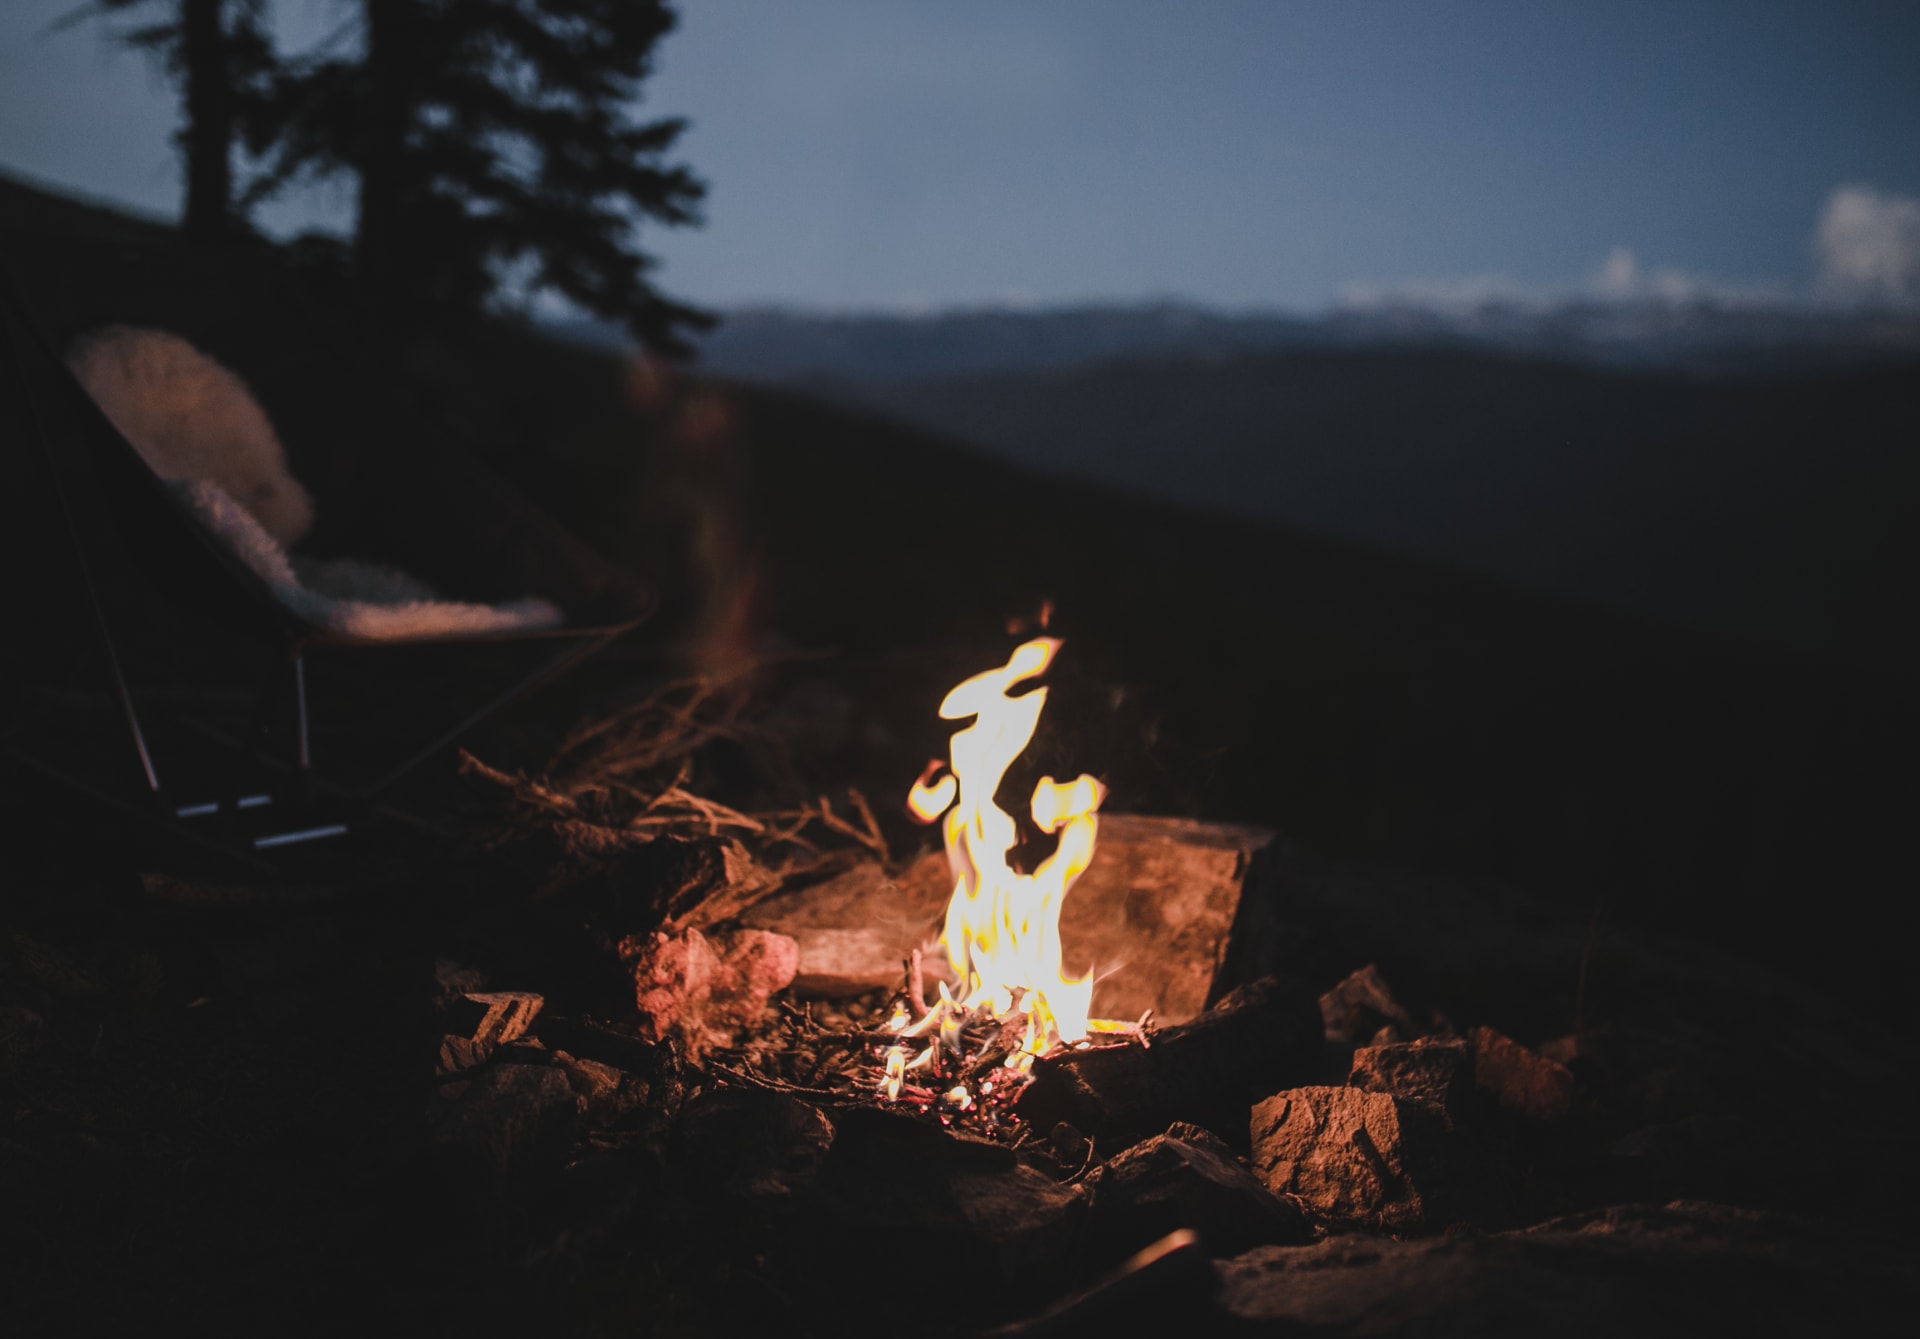 Can you beat this? A fire, great company and mountain vistas!